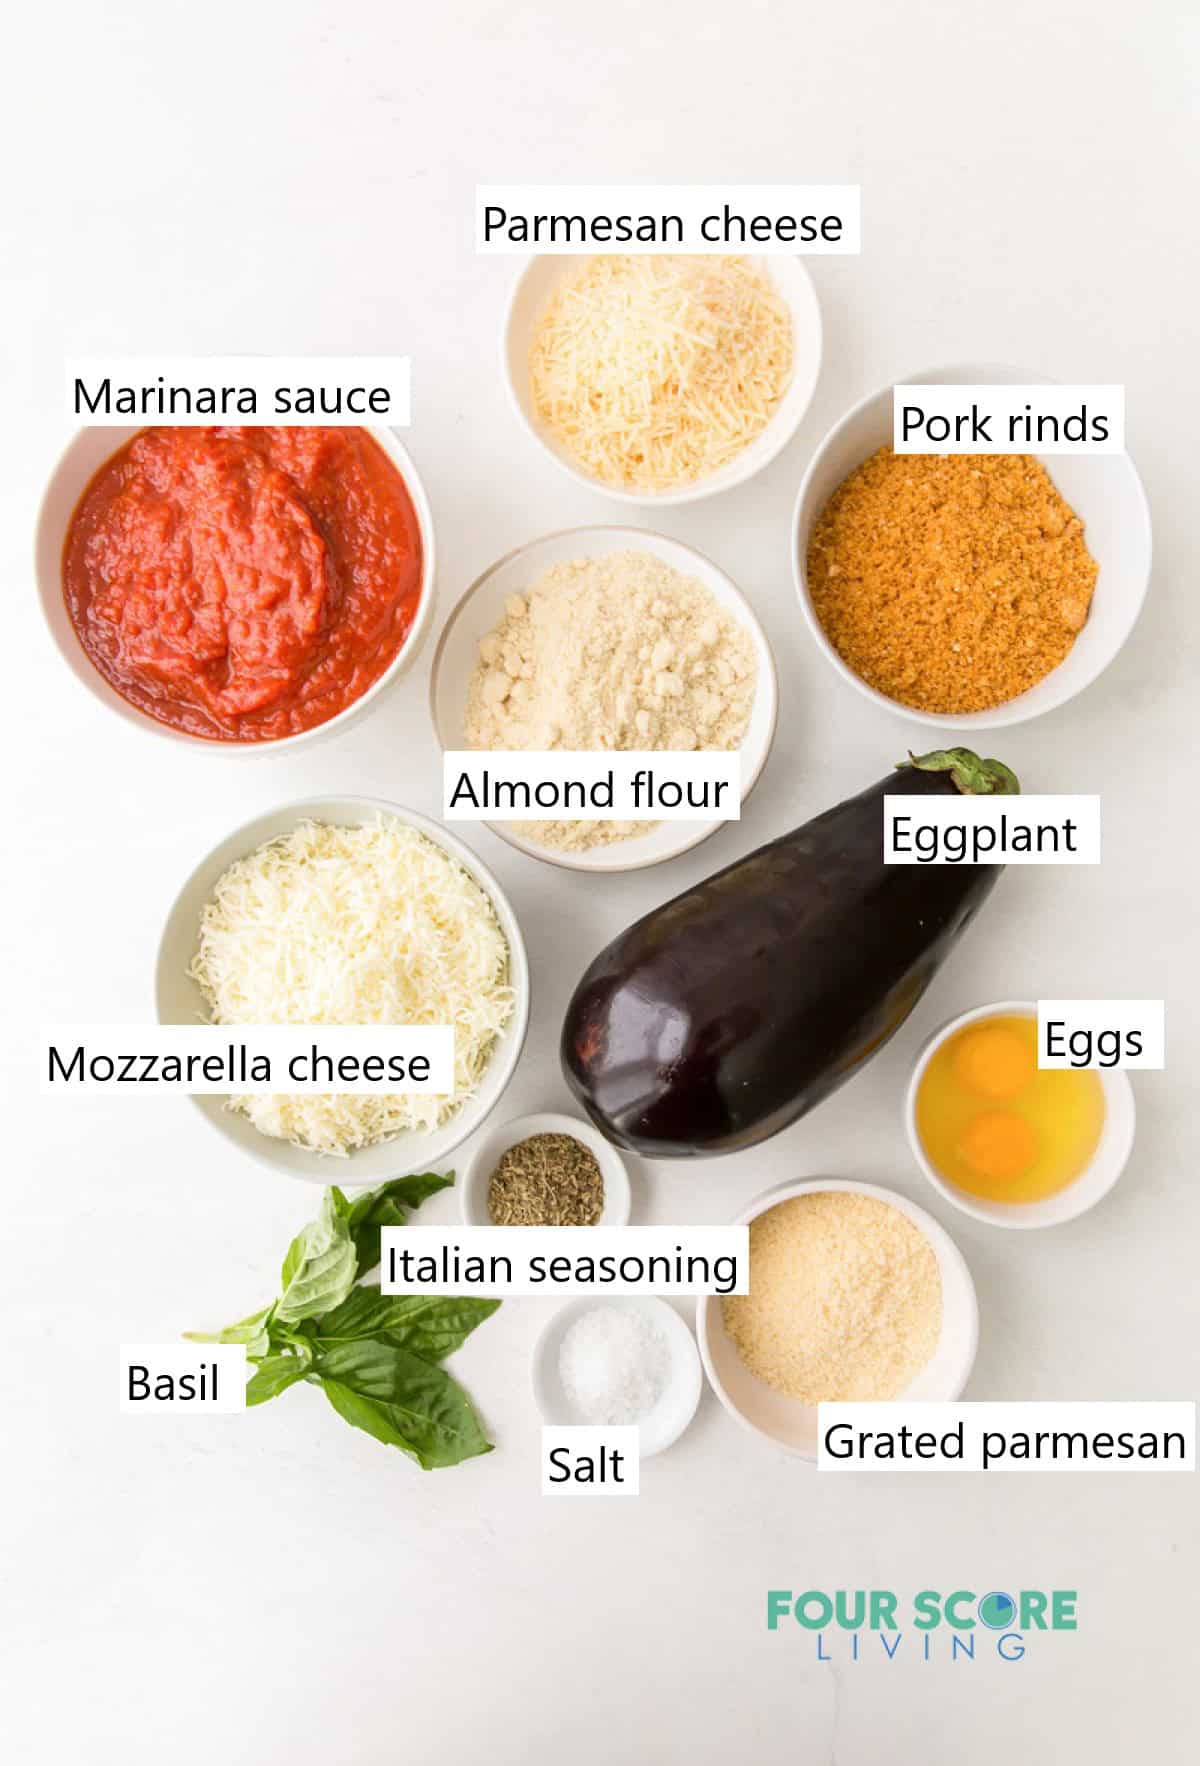 Ingredients for eggplant parmesan, including sauce, seasonings, cheeses, eggplant, and eggs.